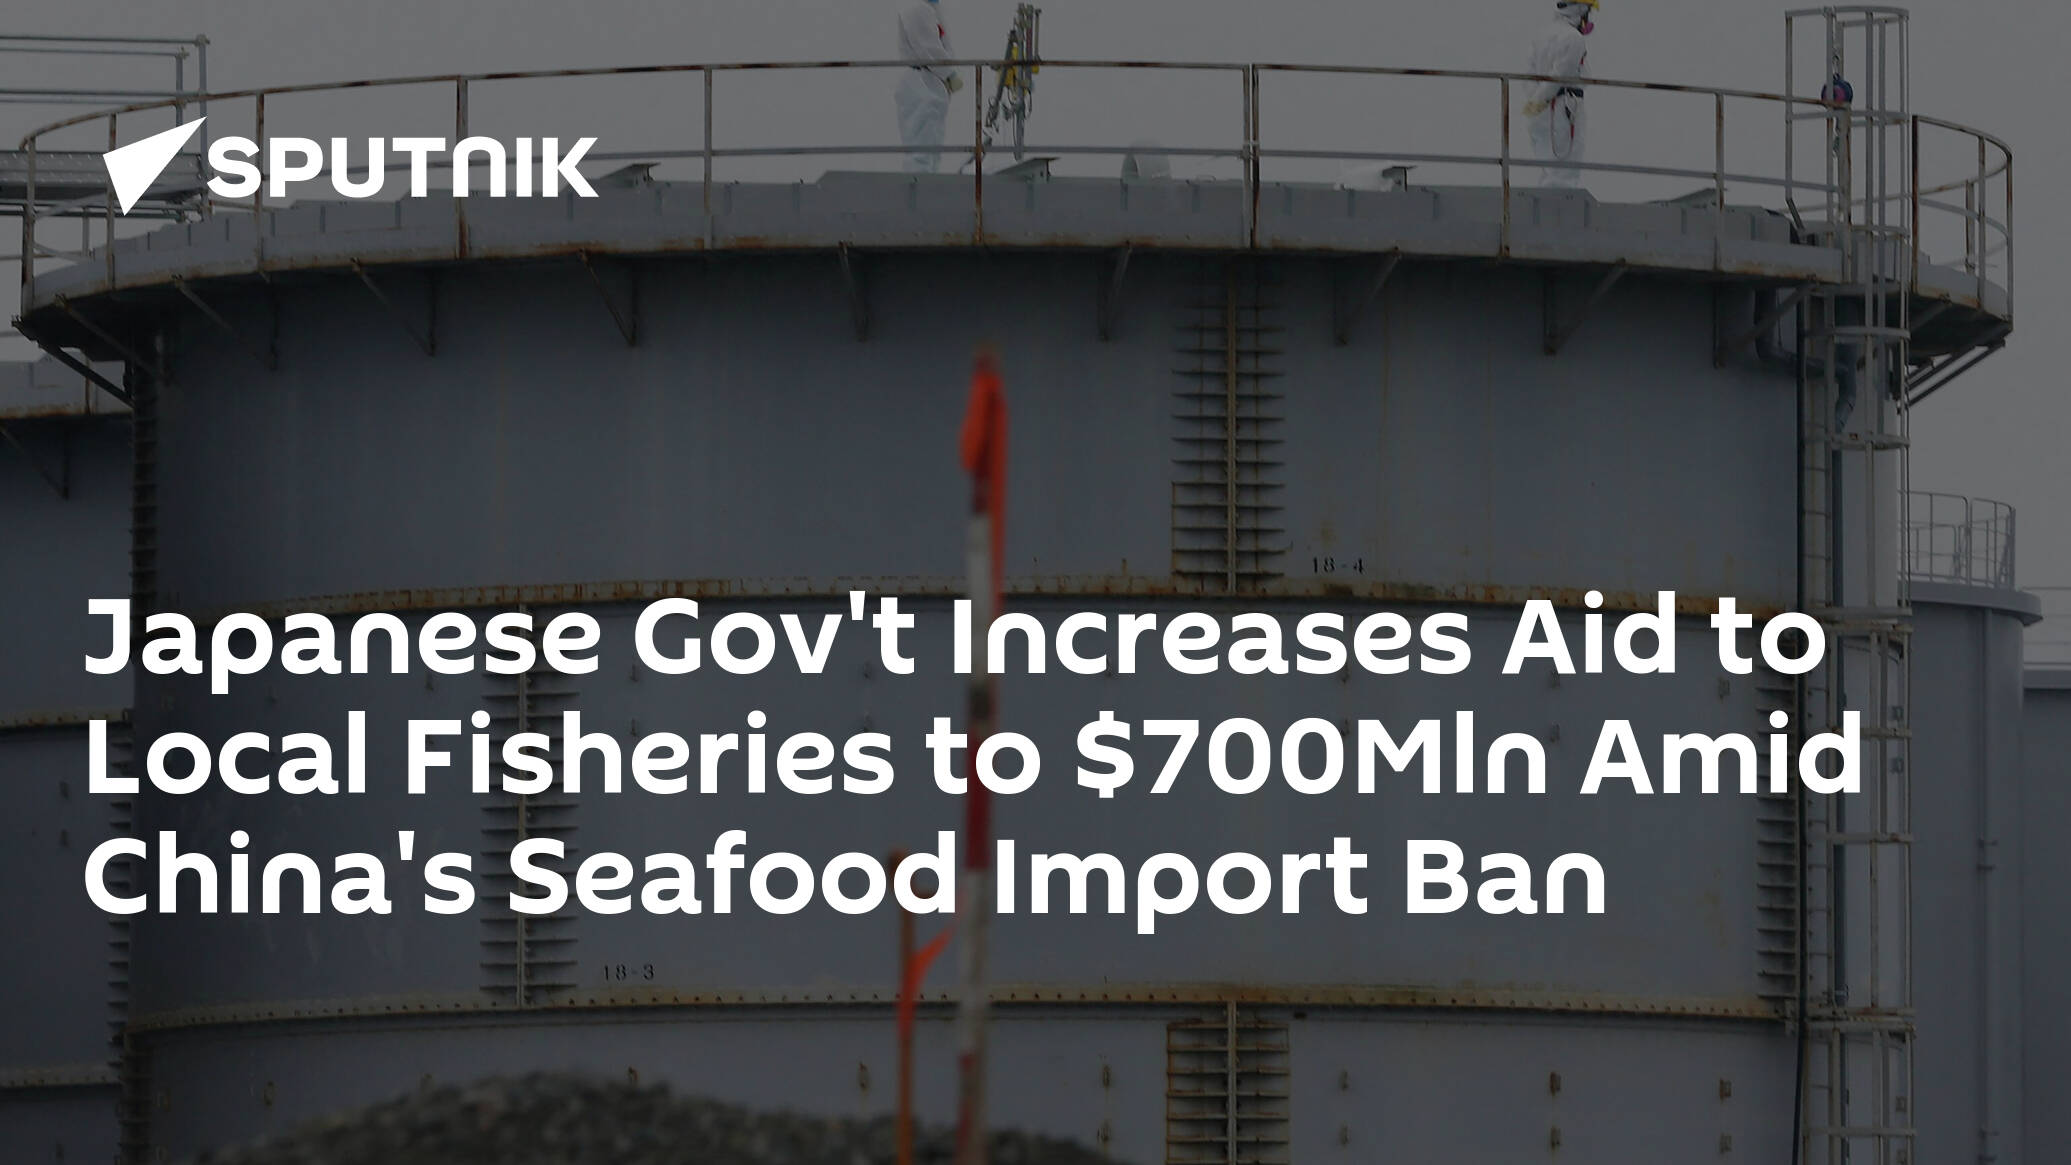 Japanese Gov't Increases Aid to Local Fisheries to 0Mln Amid China's Seafood Import Ban